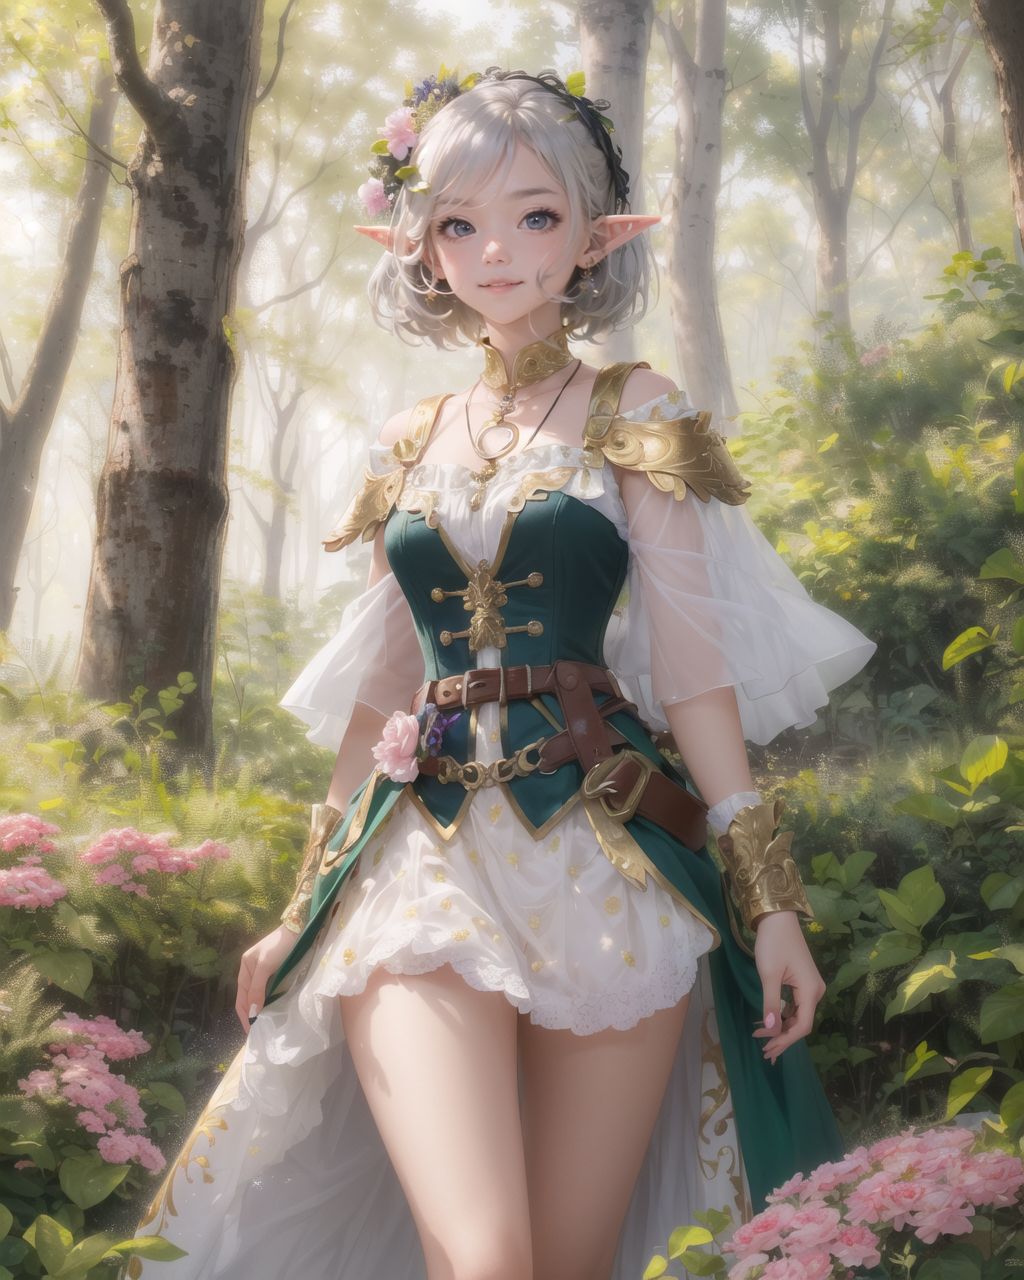 (Come on, let's paint this charming 16-year-old elf girl in detail! Represent her with more charm than flowers around her, and dedicate your time and effort to her:1.9),
She smiles, raising corners of her mouth and showing a few front teeth, with pouty lips and slightly drooping eyes epitomizing cuteness.
She is attractive 16-year-old elf warrior girl in japanese anime style, standing on mountaintop.

She stands bravely with long sword at her back.

The setting is a dense forest with towering trees reaching towards the sky. 
The morning sun shines through the thick canopy, casting a fantastic glow on the forest floor. 
Rays of sunlight filter through the leaves, creating dappled patterns of light and shadow. 
The air is filled with the fresh scent of pine and earth, and the gentle rustling of leaves is accompanied by the distant call of birds. 
A soft mist lingers near the ground, adding an ethereal quality to the scene. 
The vibrant greens of the foliage are highlighted by the golden hues of the sunlight, creating a serene and magical atmosphere,

She is poised and graceful in her luxurious armor, which gleams in twilight.
(She has idol-like kawaii face:1.5), with dark green eyes, and (silver hair in a stylish short cut with a delicate flow:1.6),
She wears silver hairpiece, green blouse with ruffled neckline, brown corset top with gold cross-stitching, dark brown underbust corset with gold buckles, emerald green cape with gold brooch shoulder clasp, leaf-shaped shoulder straps with gold trim, green fabric wrist cuffs, a forest green multi-layered skirt with gold trim, leather utility belt with a pouch, brown folding boots, and contrasting dark and light green accessories.
She also has a necklace, bracelet, and an intricate gold armband on her upper arm.

Her stance is powerful and brave, yet youthful and graceful, embodying ideal blend of innocence and glamour.
low angle emphasizes her cuteness and highlights the delicate textures of her hair and clothing.
Natural light casts soft shadows and highlights the youthful contours of her face, bringing her into sharp focus.
The shallow depth of field of the 50mm f/1.2 lens creates a beautiful depth-of-field blur that keeps her face in focus, with high-resolution, detailed graphics, vibrant colors, and professional quality.
Ultra-high resolution captures every detail, from individual strands of hair to the intricate fabric of her costume.
Professional clarity and contrast bring vibrant colors to life.